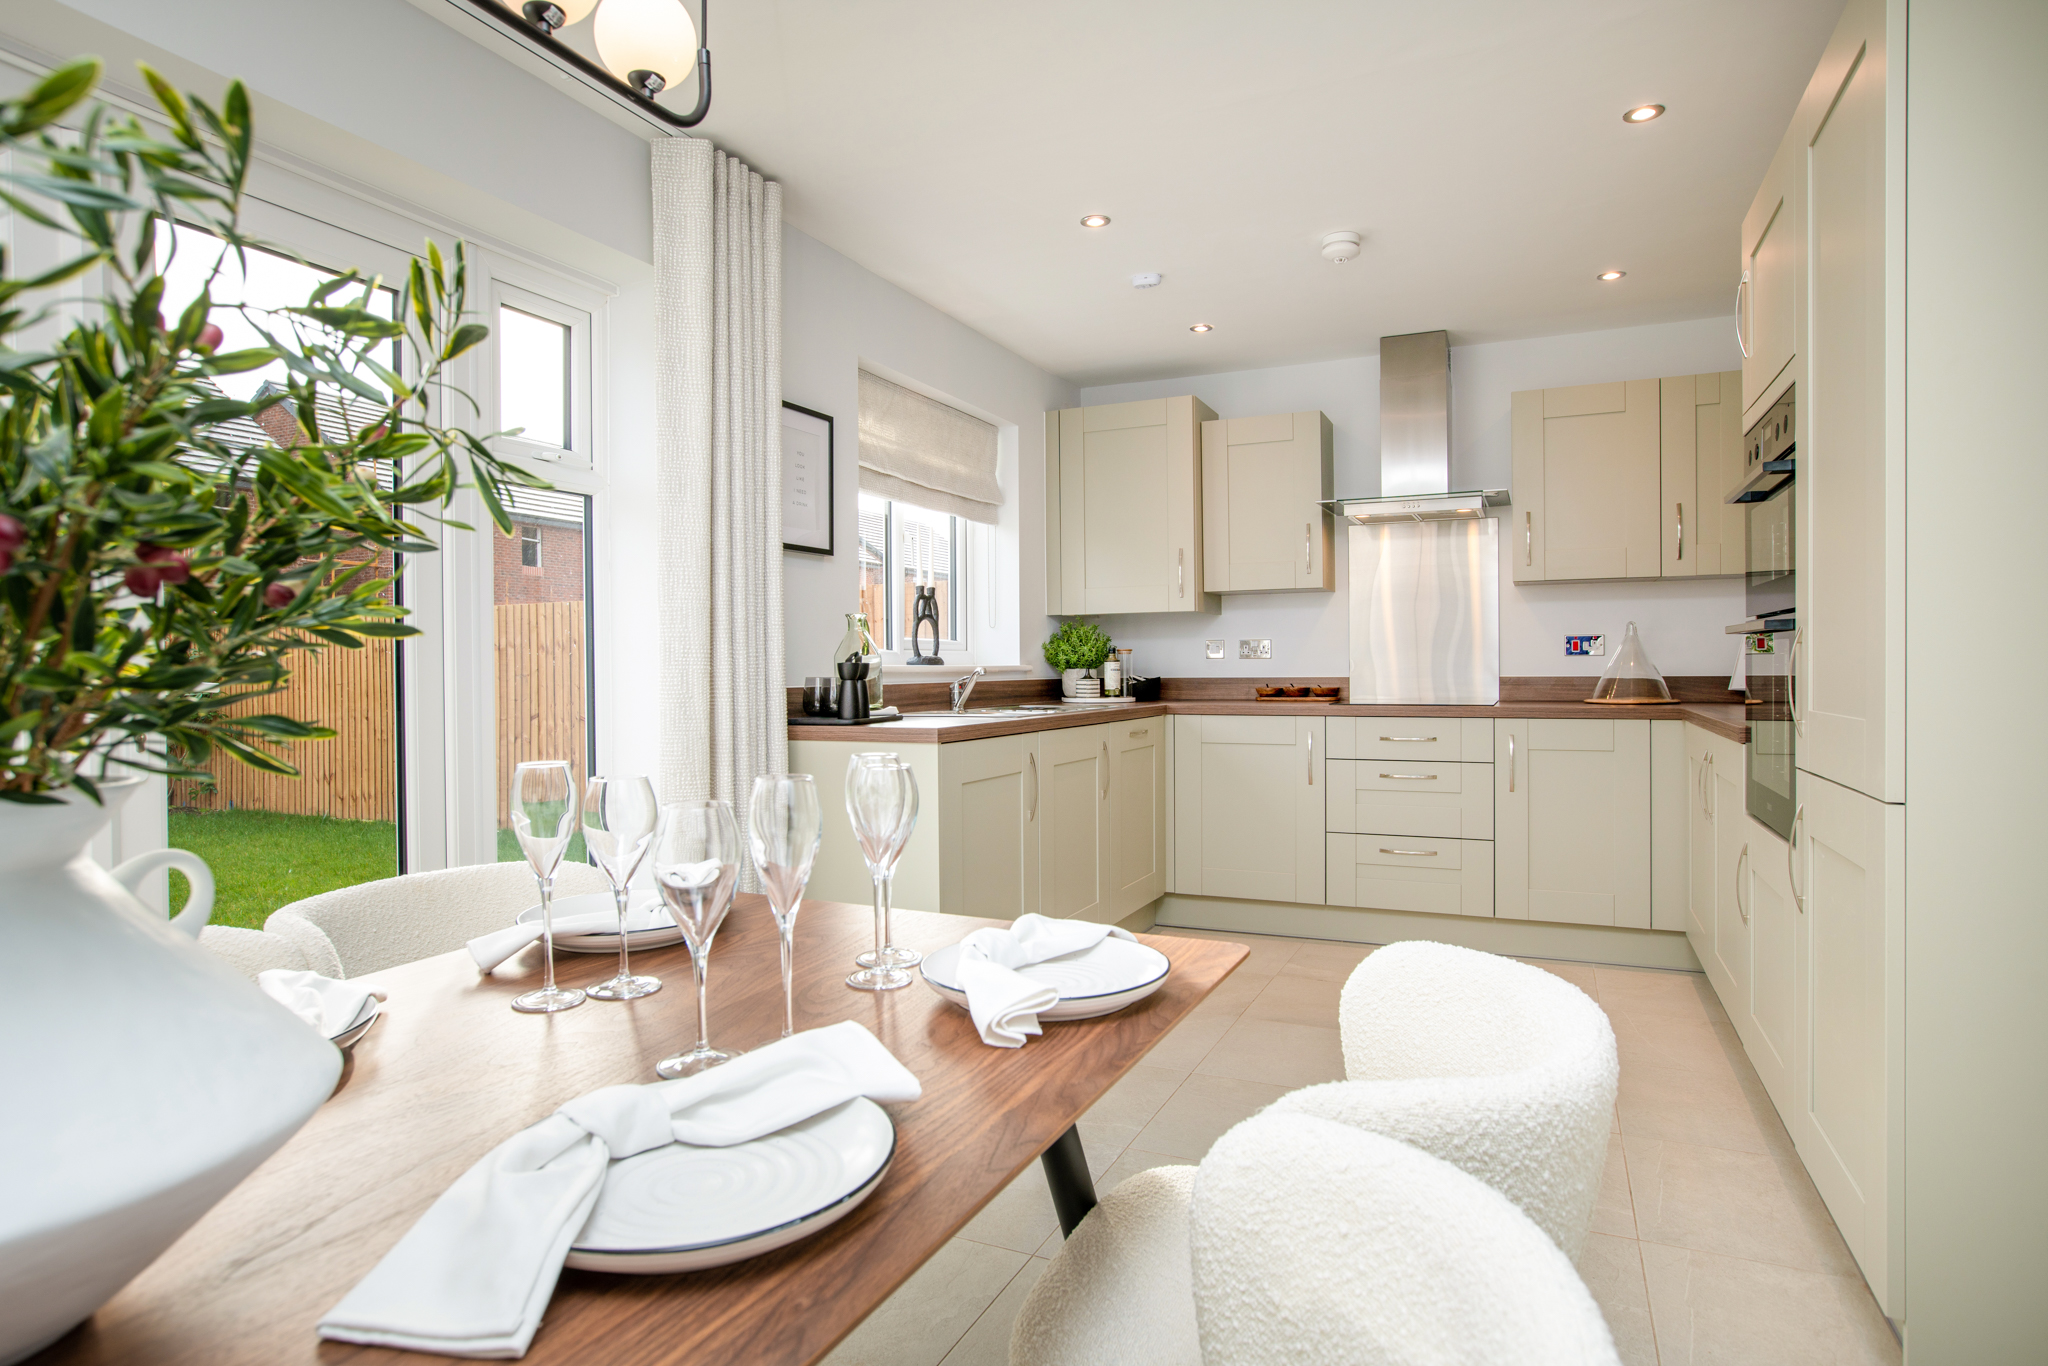 Property 1 of 15. Showhome Photography